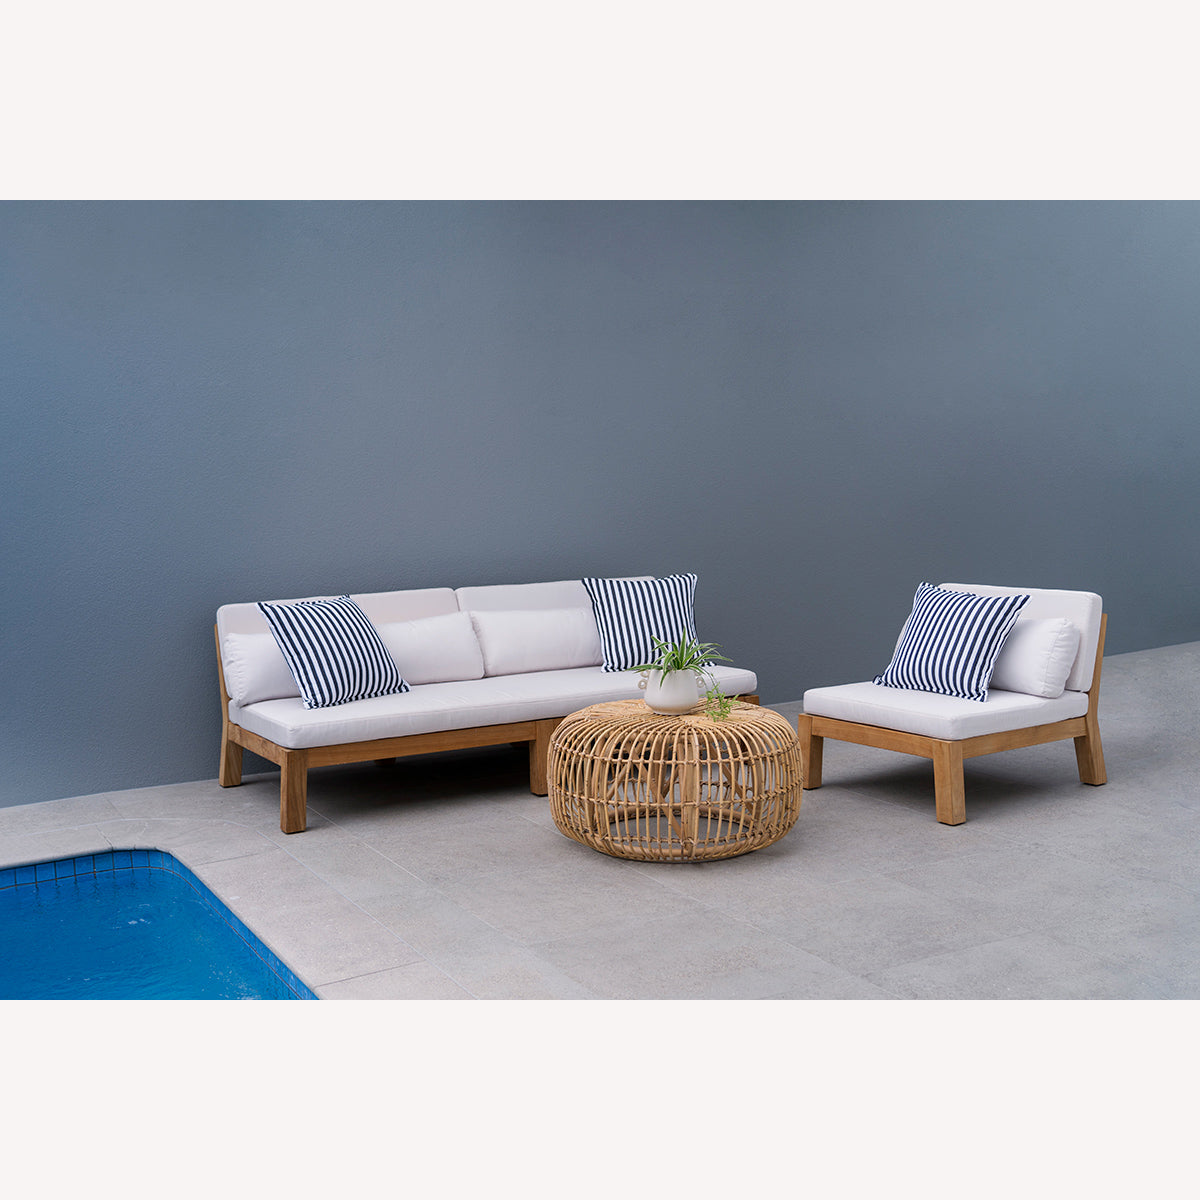 Carney Rattan Coffee Table in Natural - 85cm - Notbrand